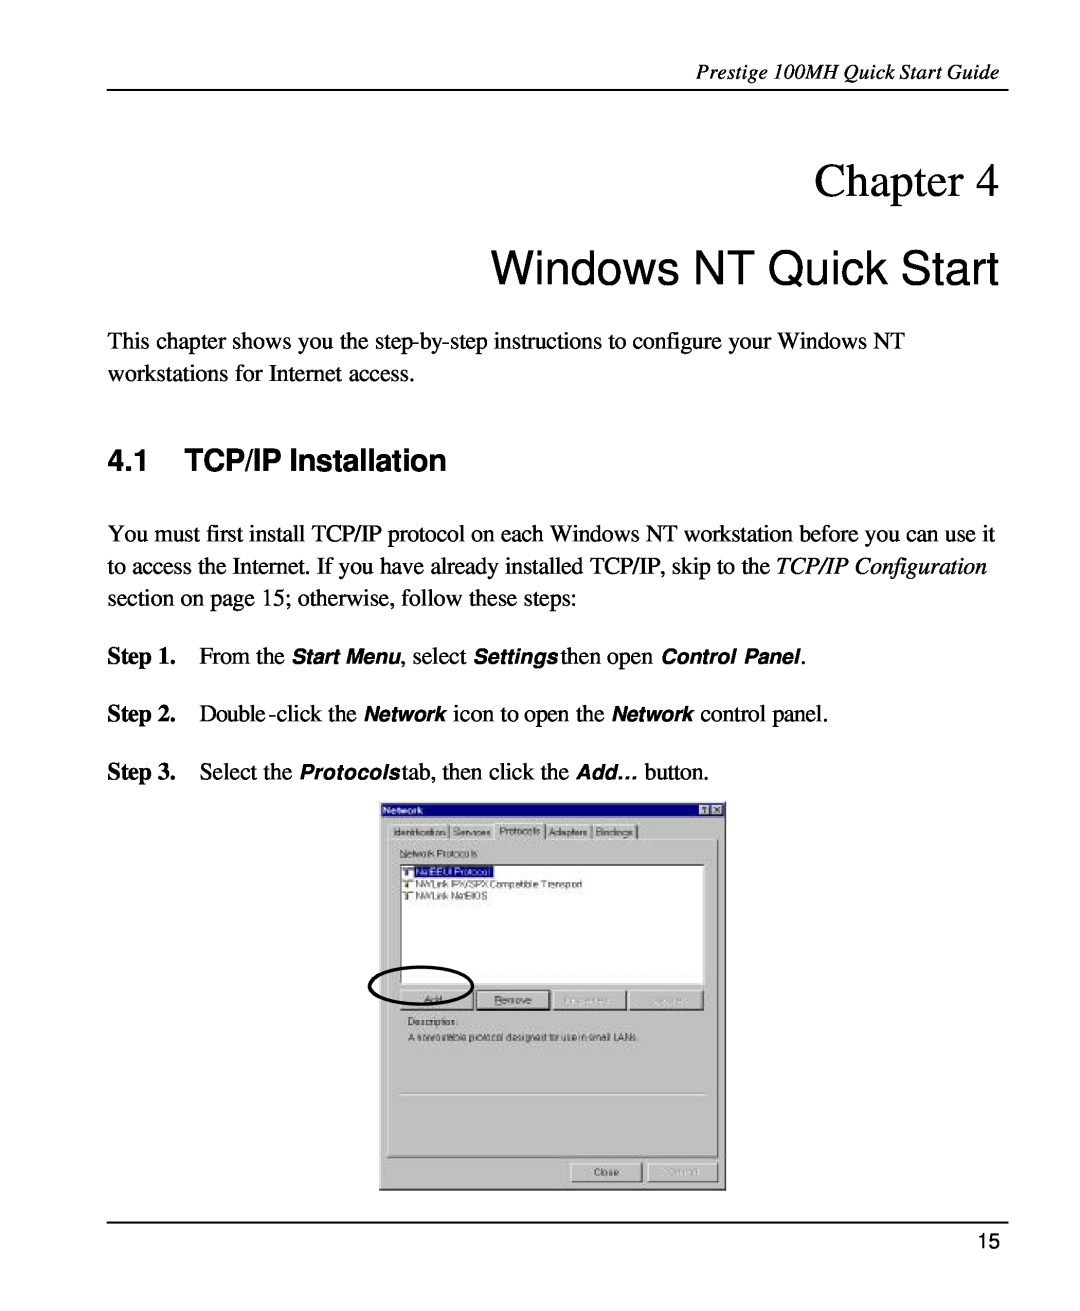 ZyXEL Communications 100MH quick start Windows NT Quick Start, 4.1 TCP/IP Installation, Chapter 